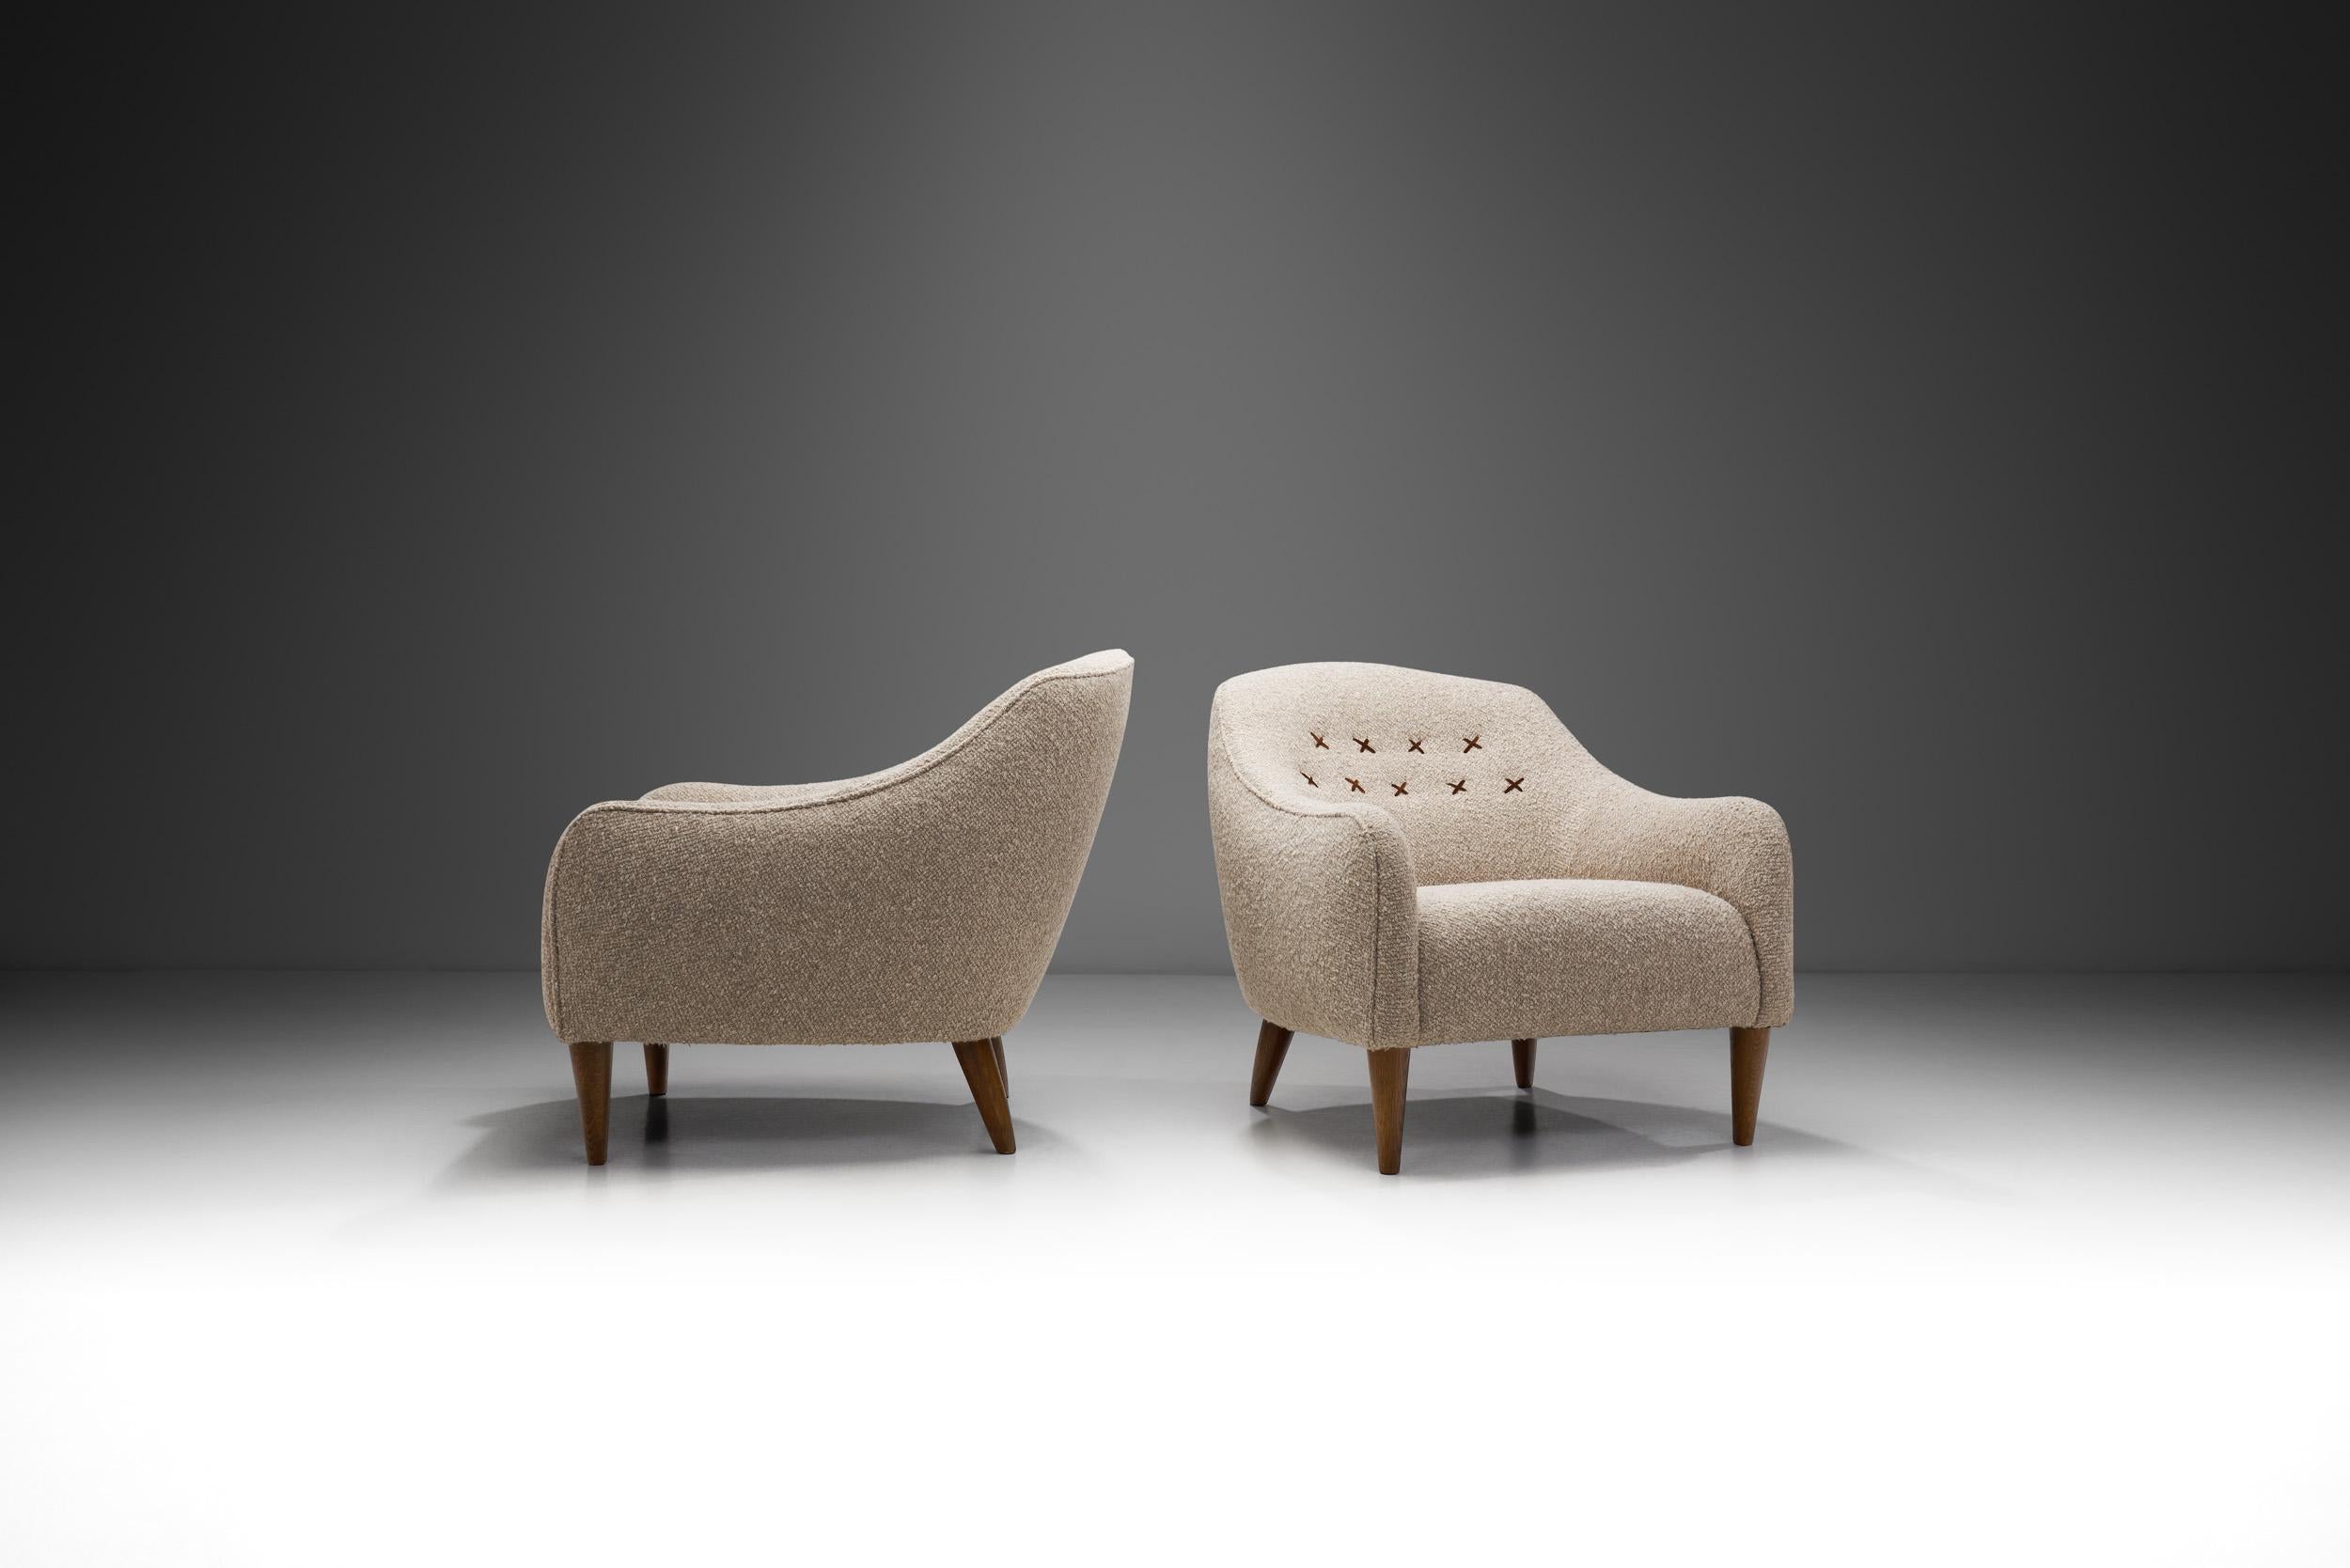 What connected European seating models of the mid- and later 20th century was that comfort and functionality were often the main priority. As this pair of armchairs exemplifies, strong ornamentation was considered unnecessary, while quality